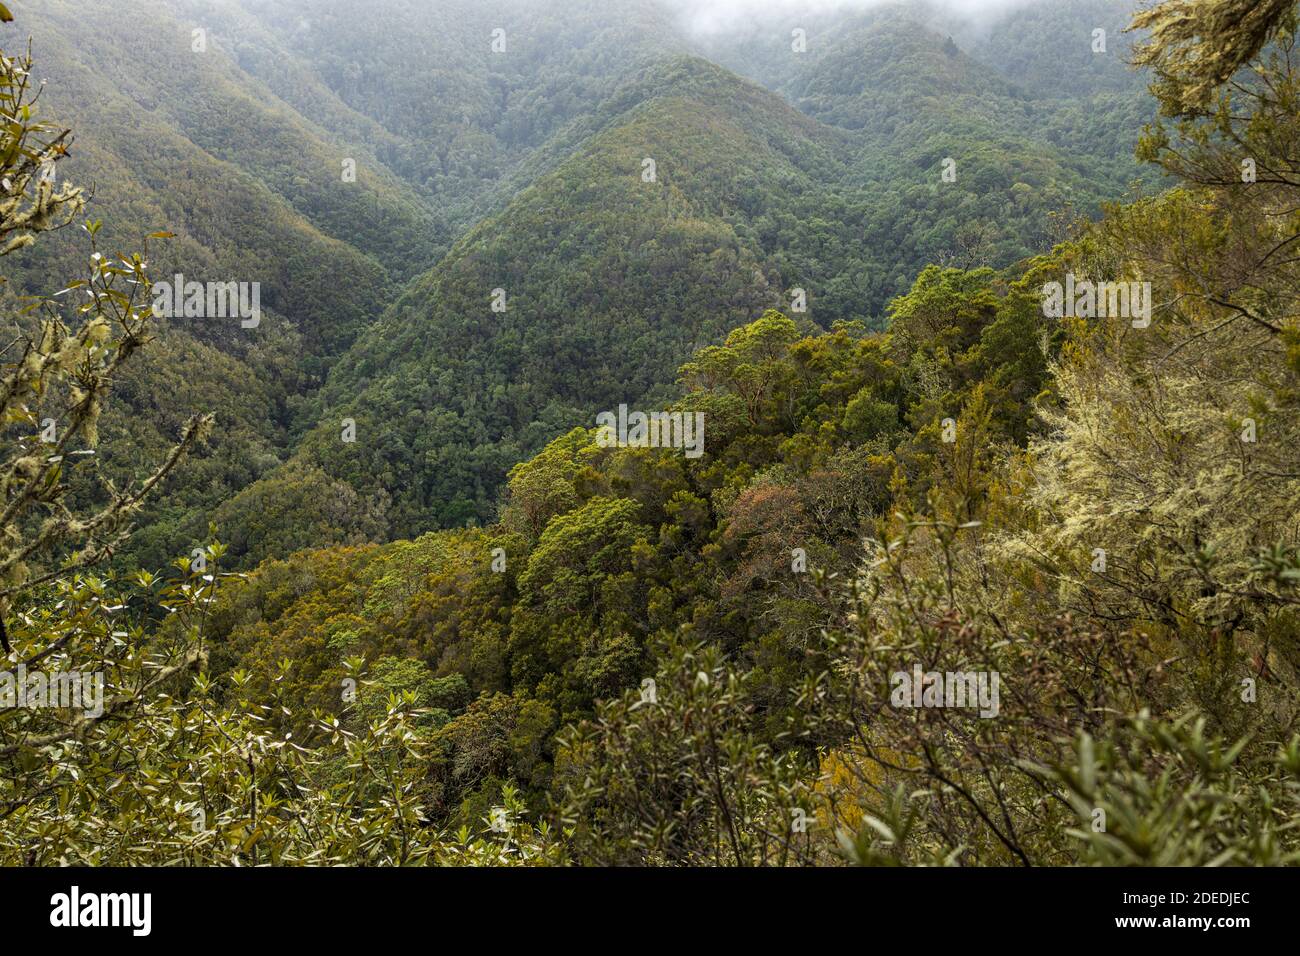 Cloudy overcast day over the Madre de Agua forests near Erjos, Teno, Tenerife, Canary Islands, Spain Stock Photo